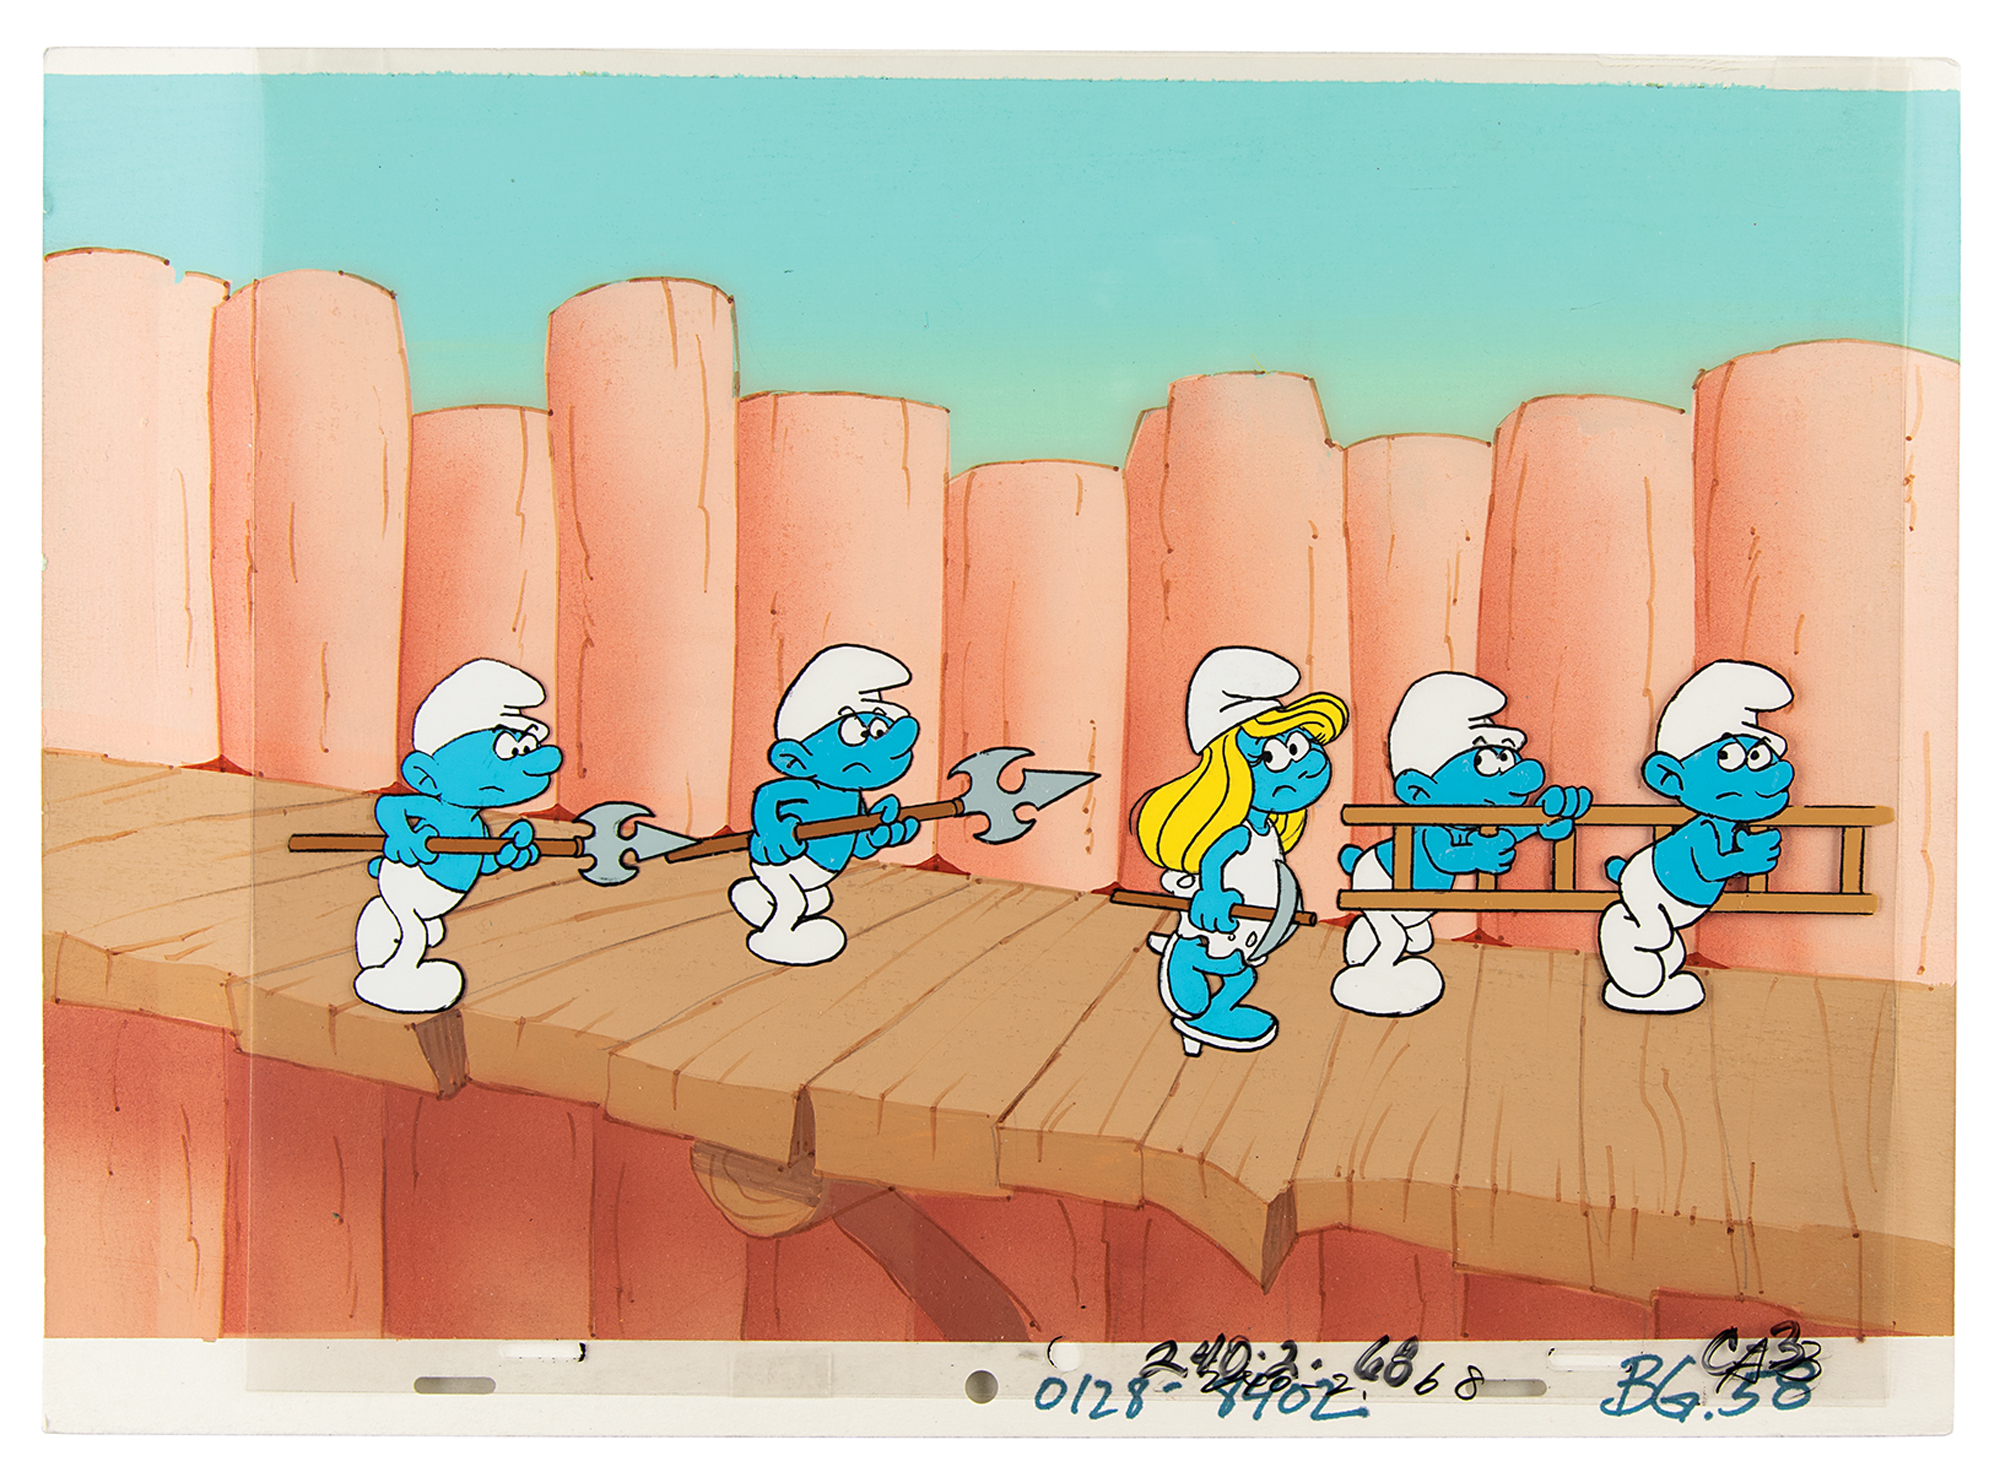 Lot #851 Smurfette and four Smurfs production cel and master production background from The Smurfs television show